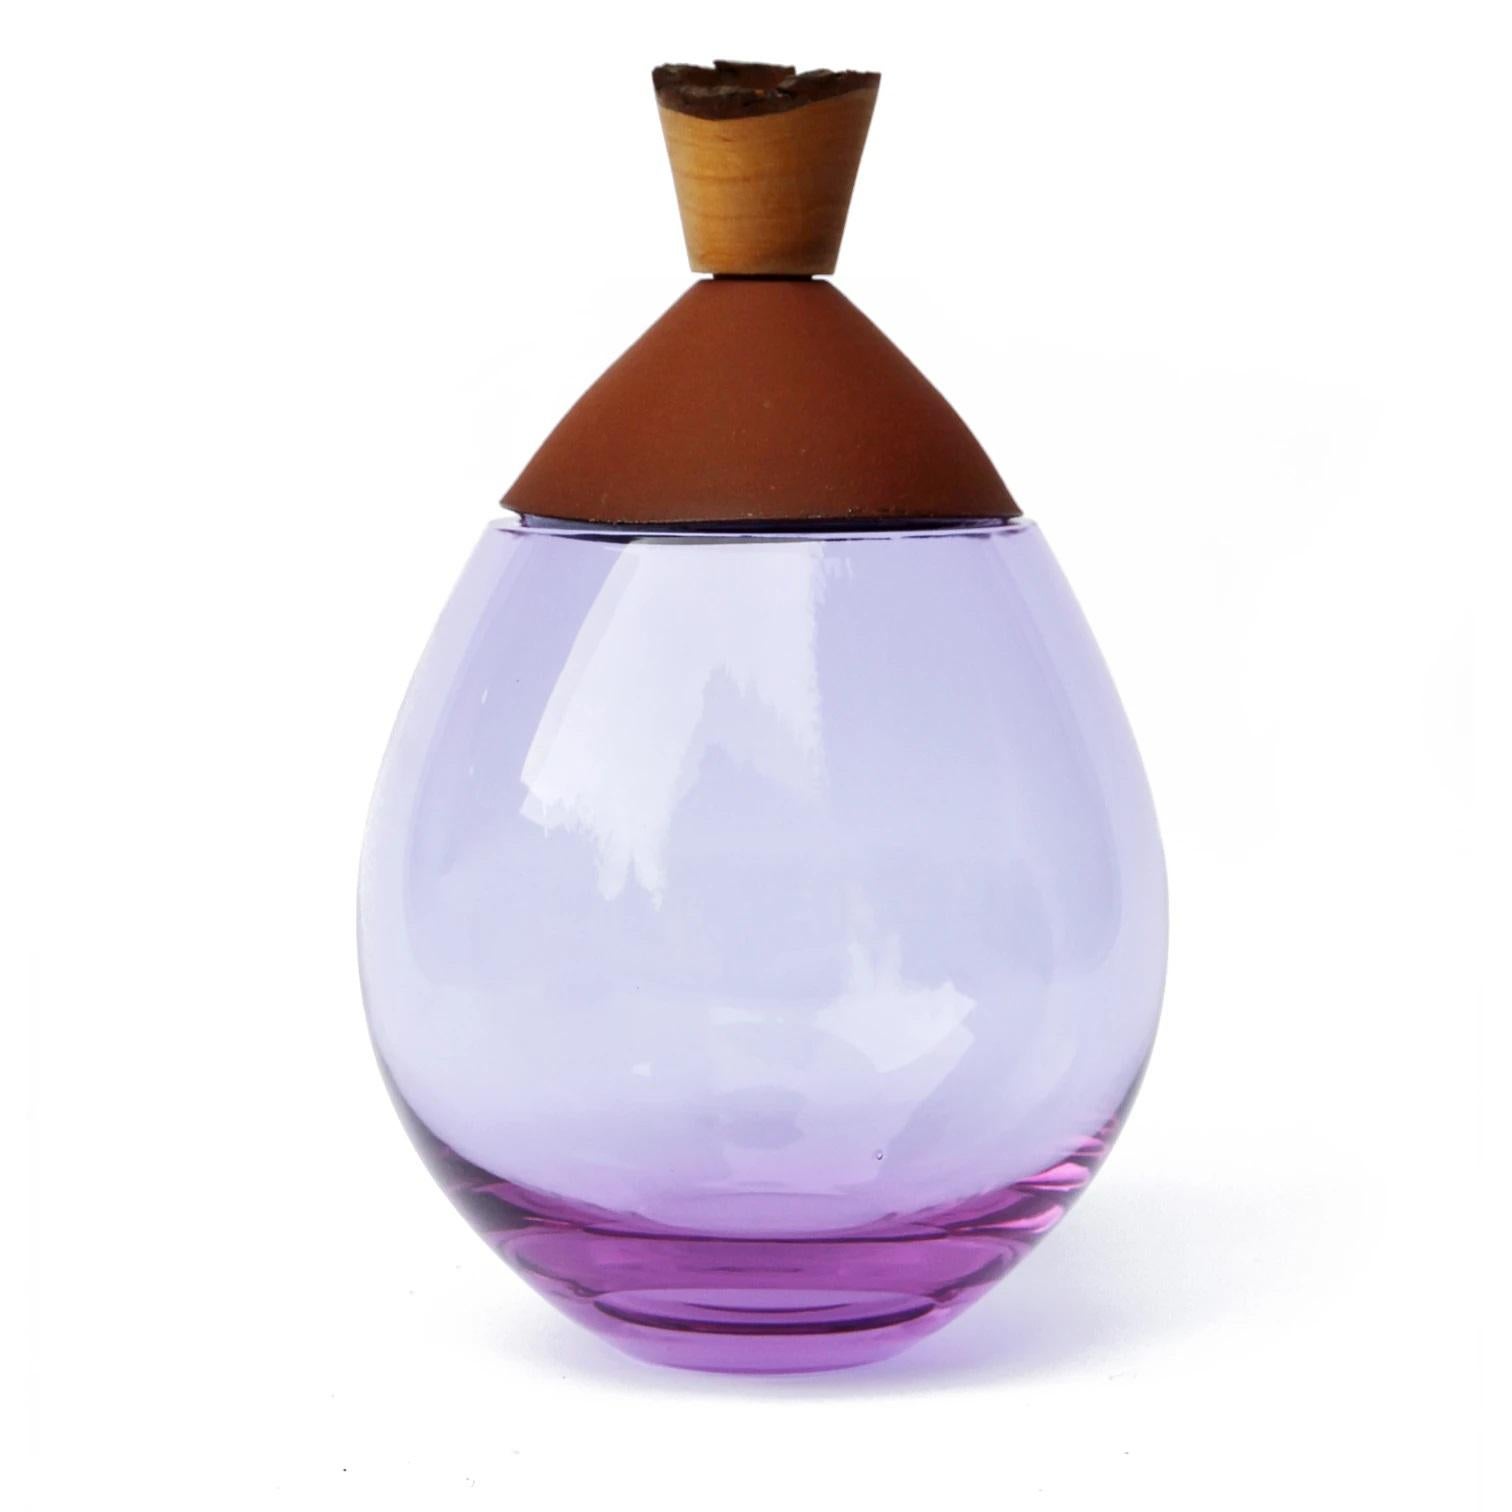 Lavender and terracotta Satu stacking vessel, Pia Wüstenberg
Dimensions: D 19 x H 23
Materials: glass, wood, ceramic
Available in other colors.

Handmade in Europe: handblown glass (Czech Republic), earthenware ceramic (Germany), hand turned